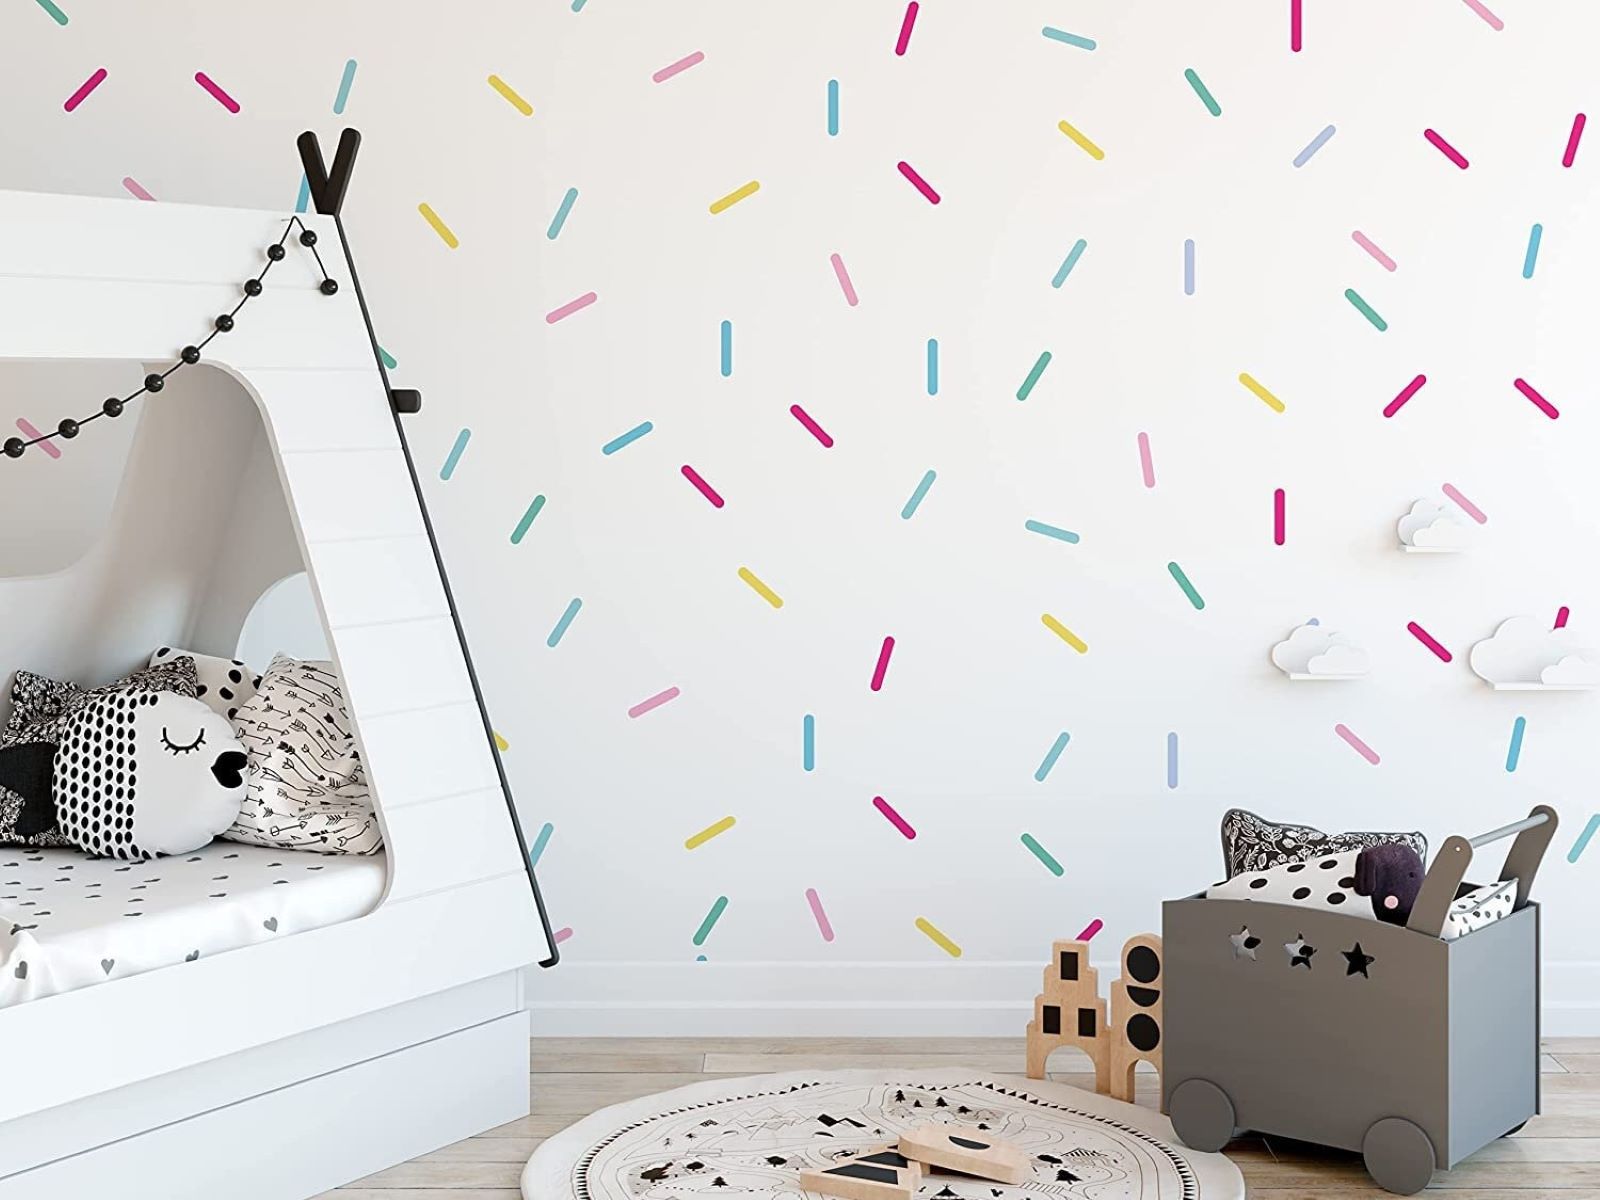 How To Use Confetti Stickers In DIY Projects